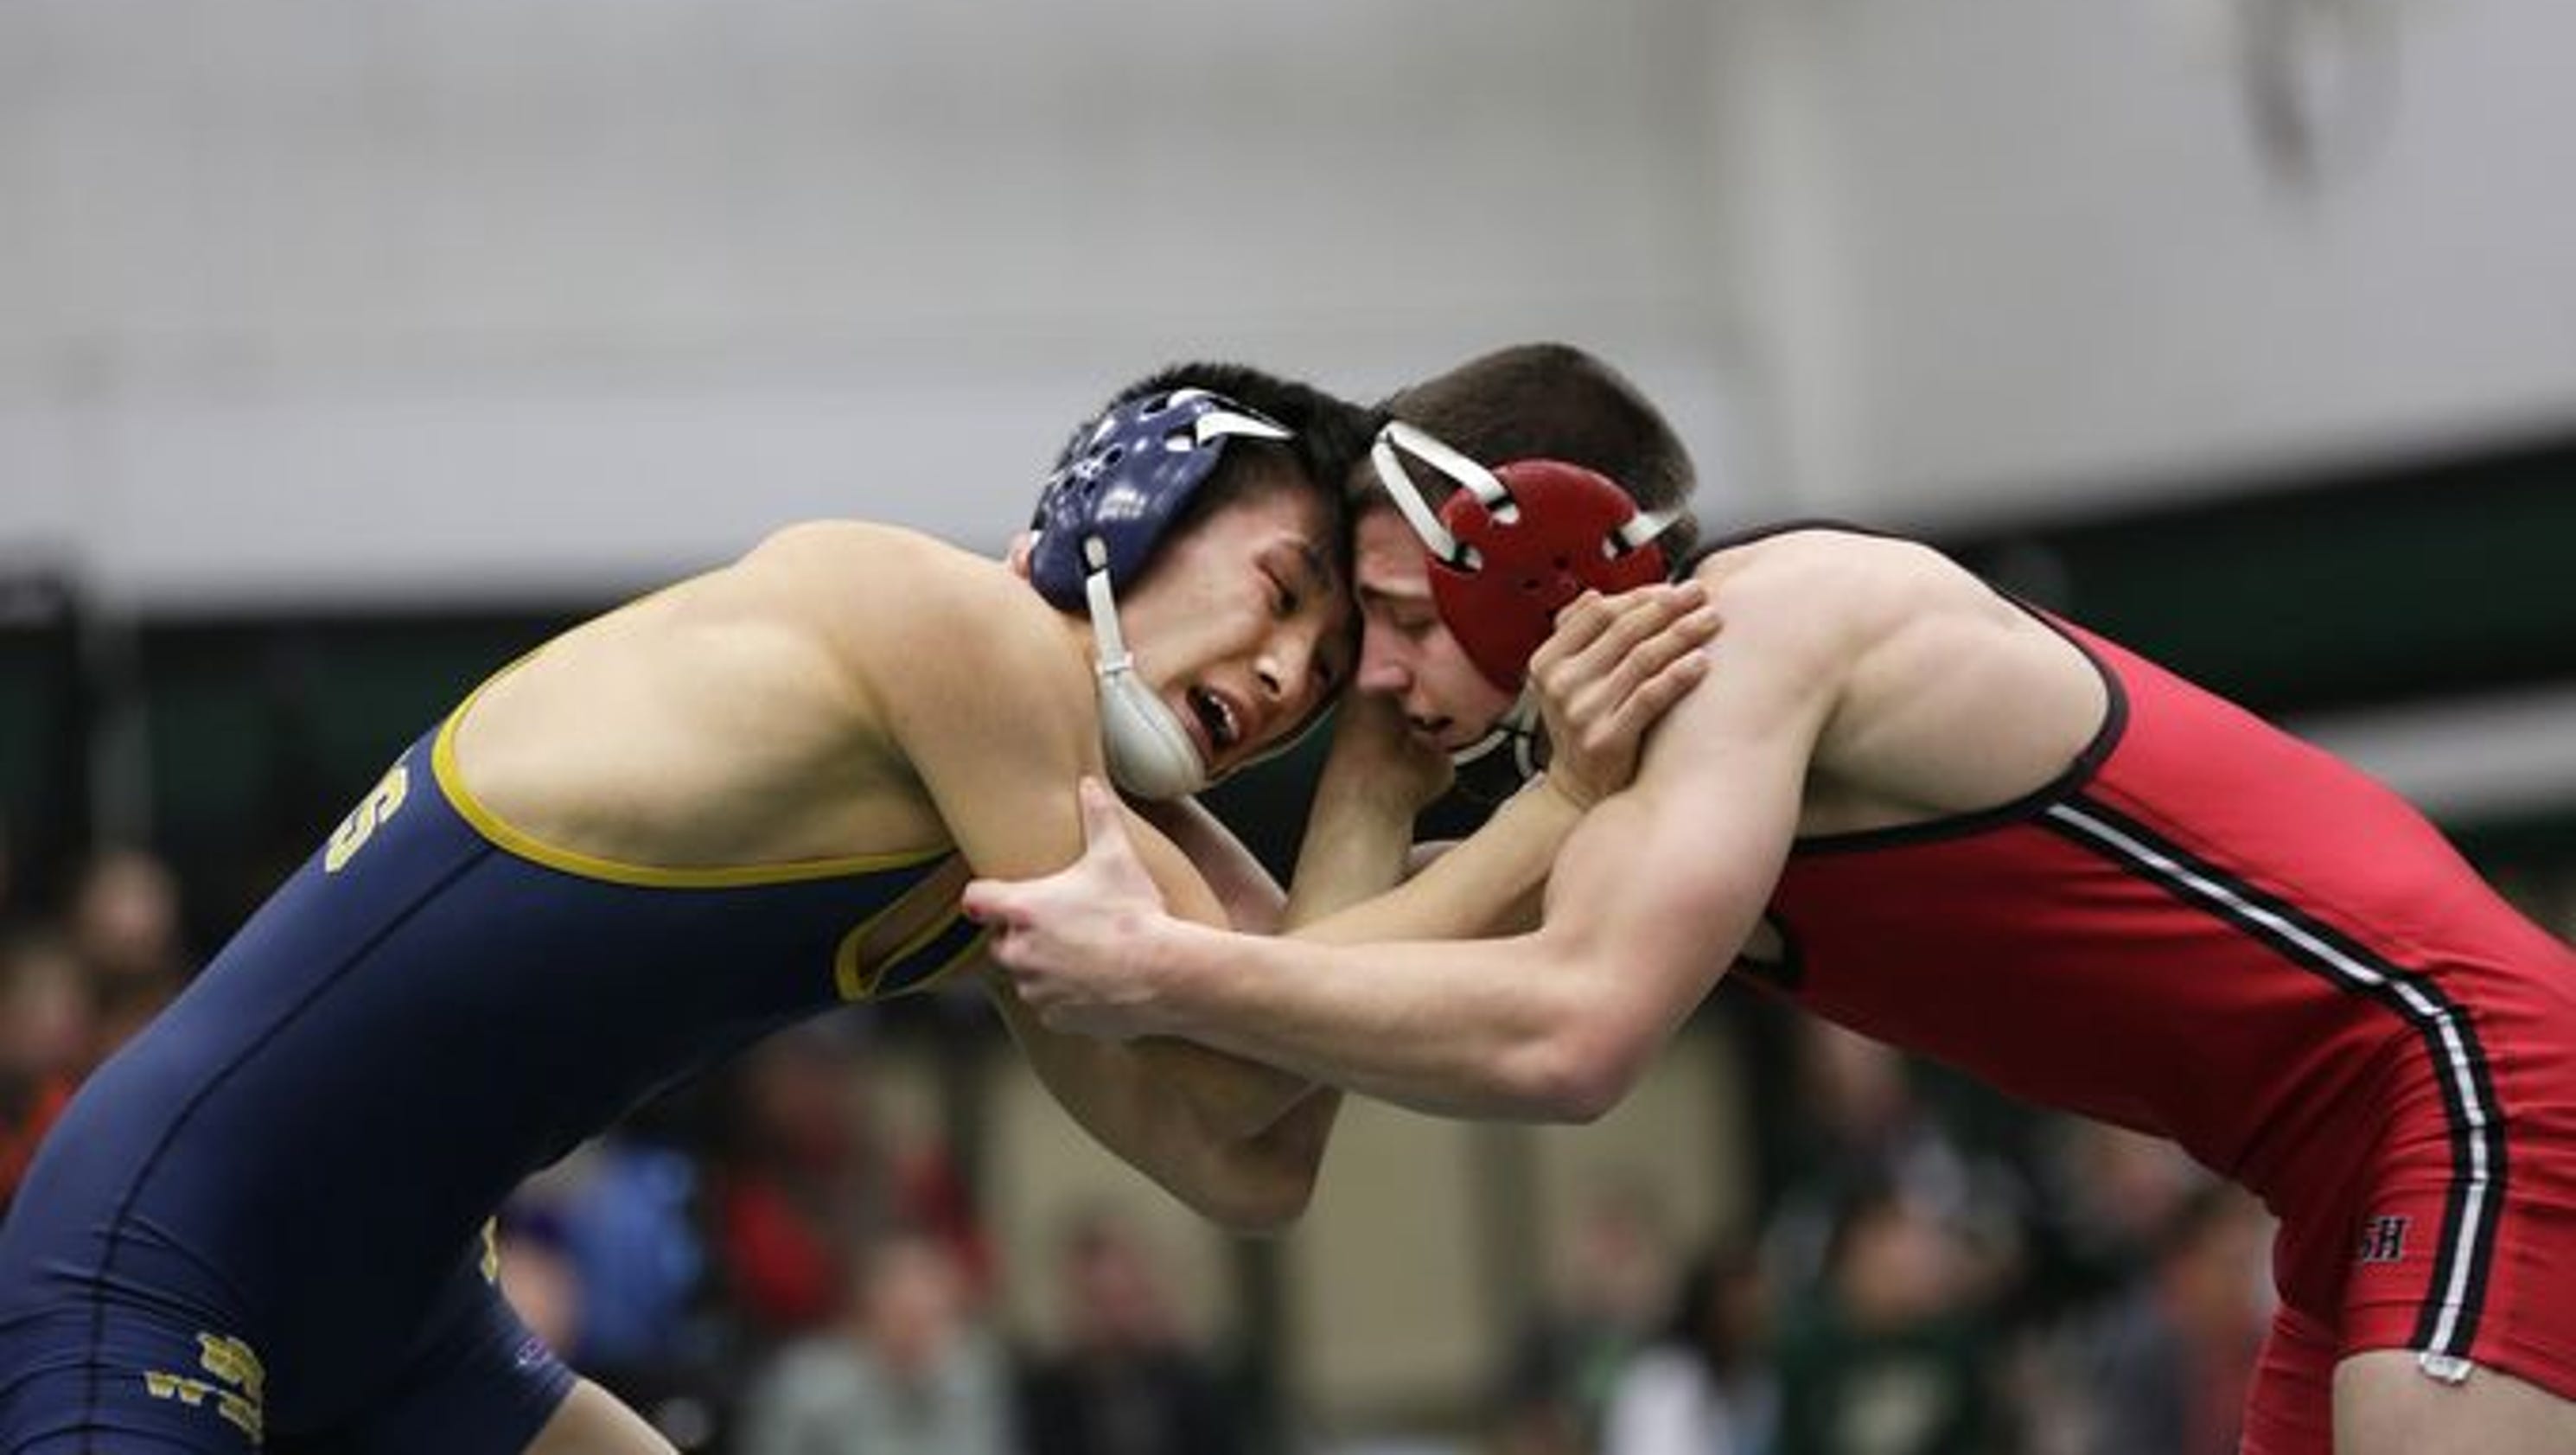 WIAA wrestling Day 1 results from Madison